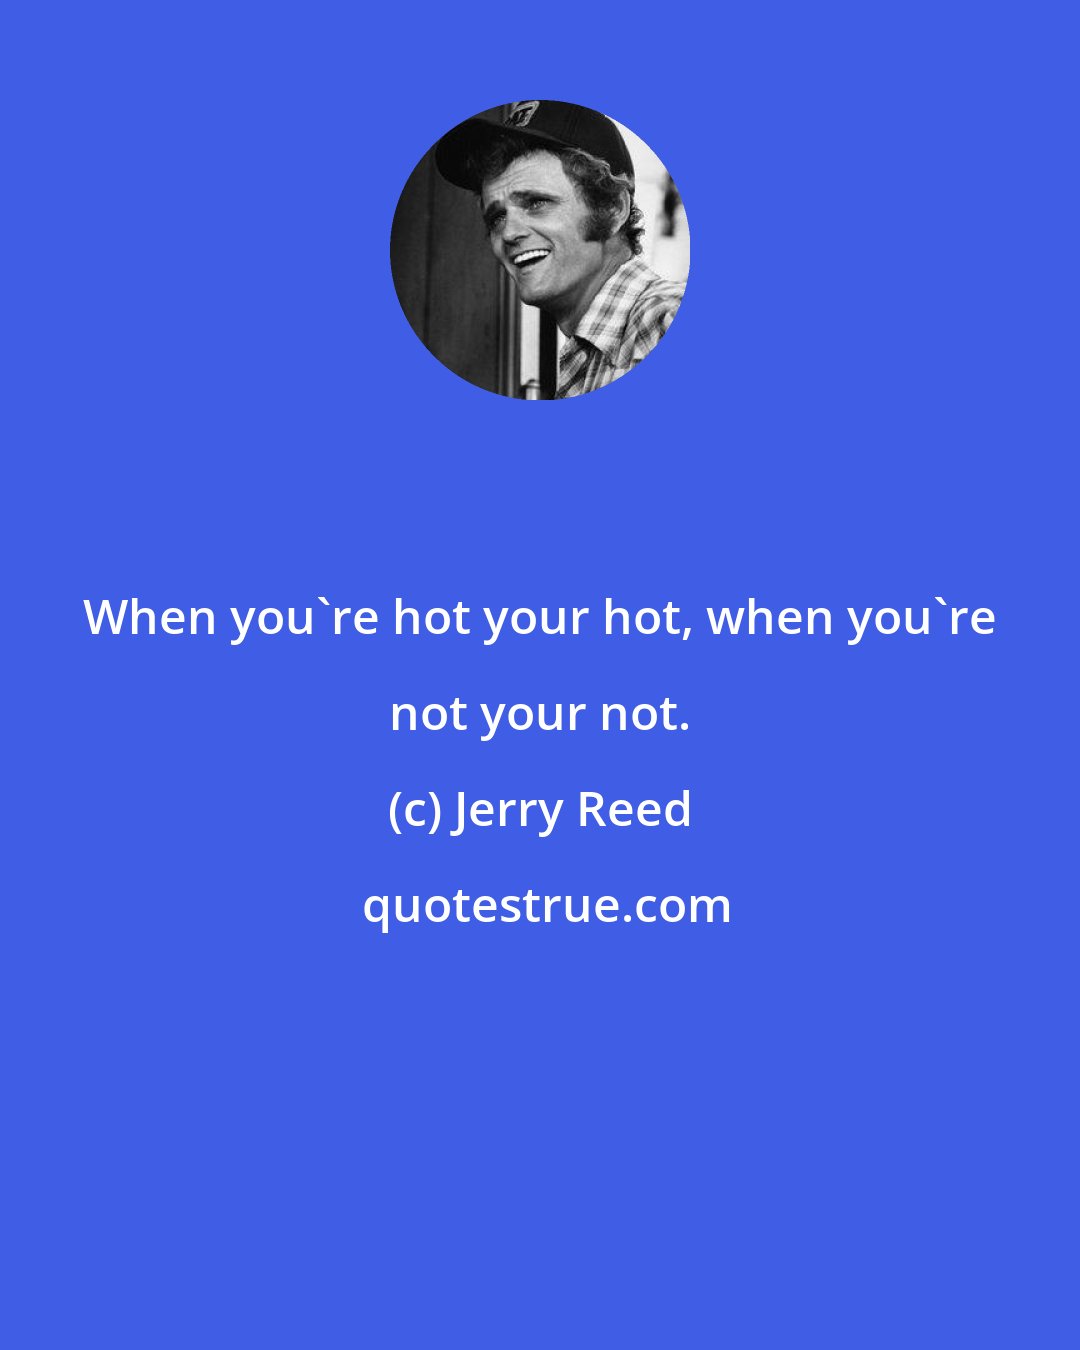 Jerry Reed: When you're hot your hot, when you're not your not.